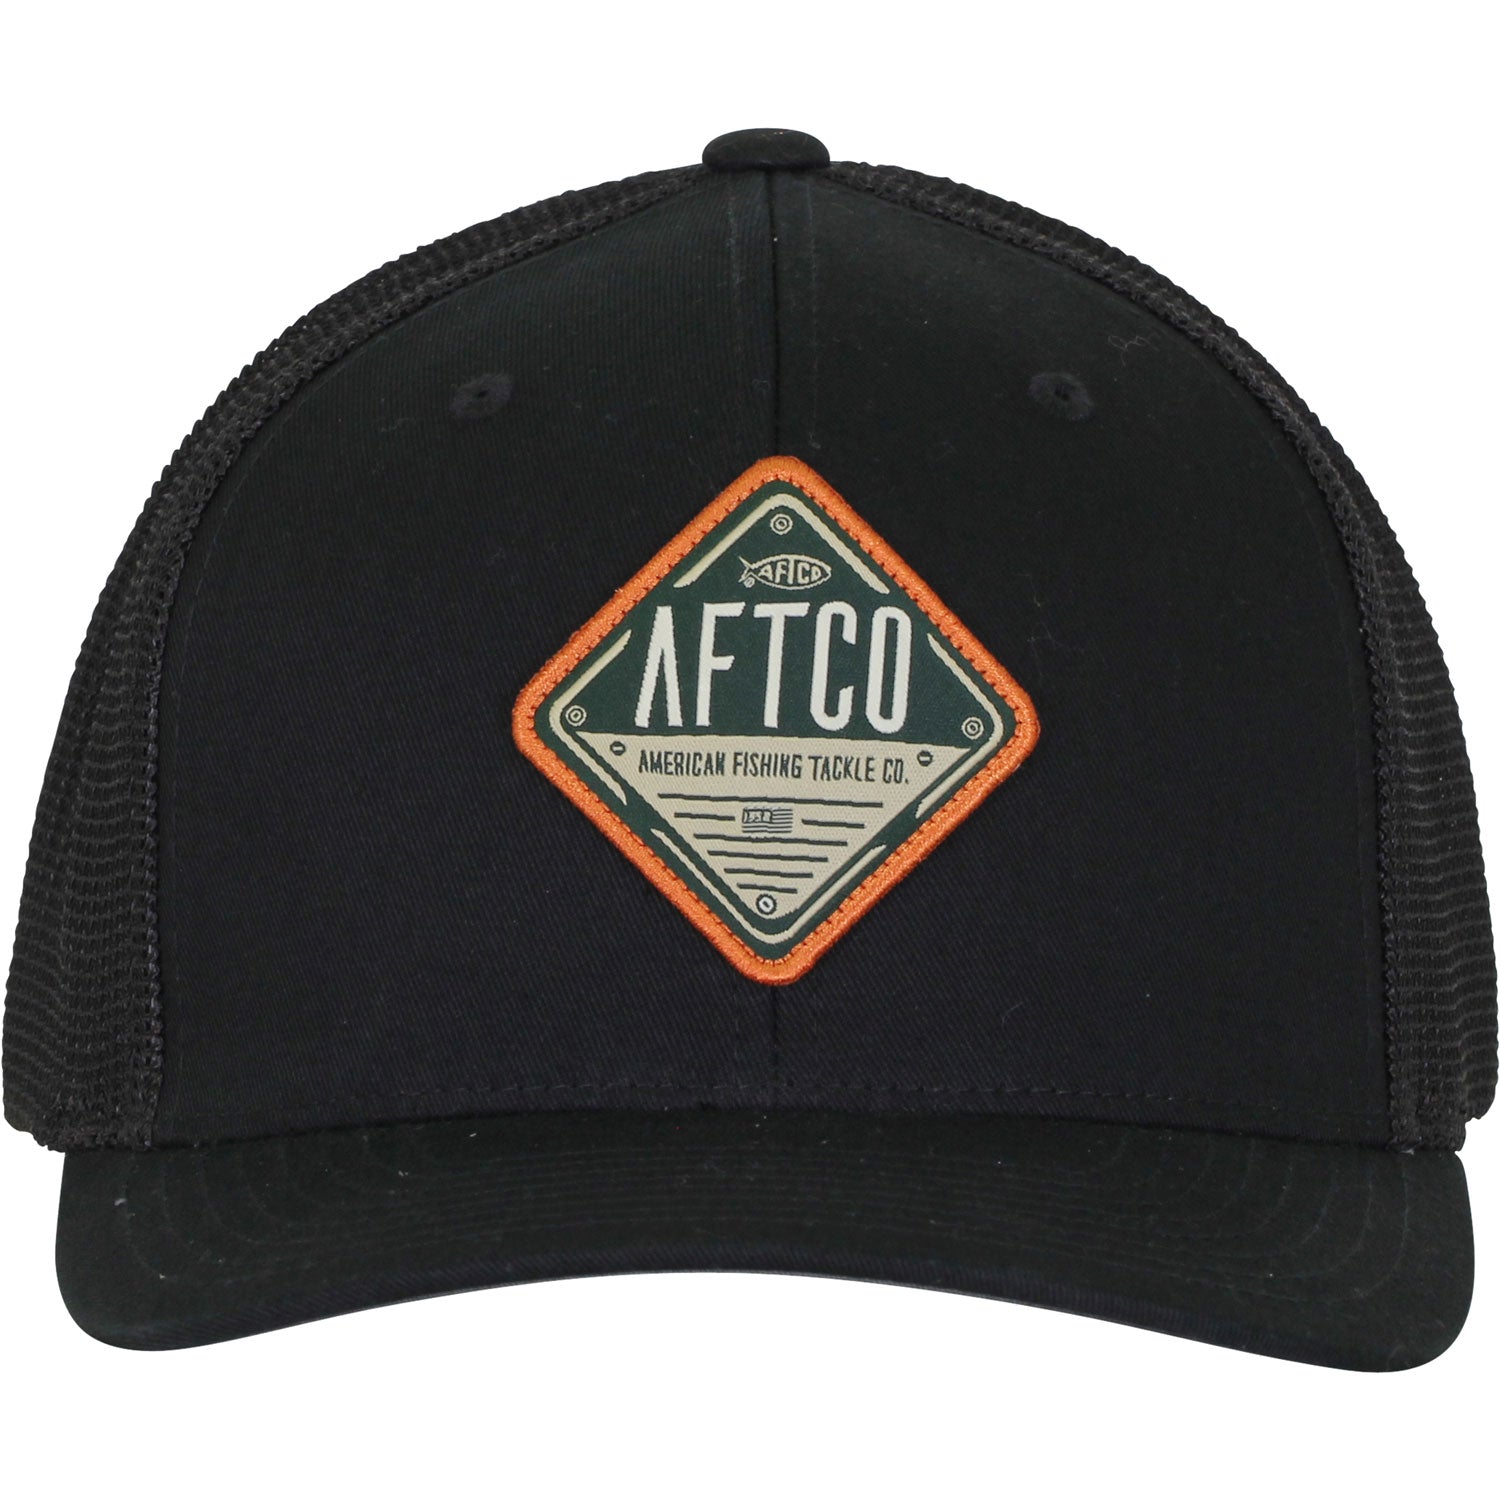 AFTCO Guide Hat